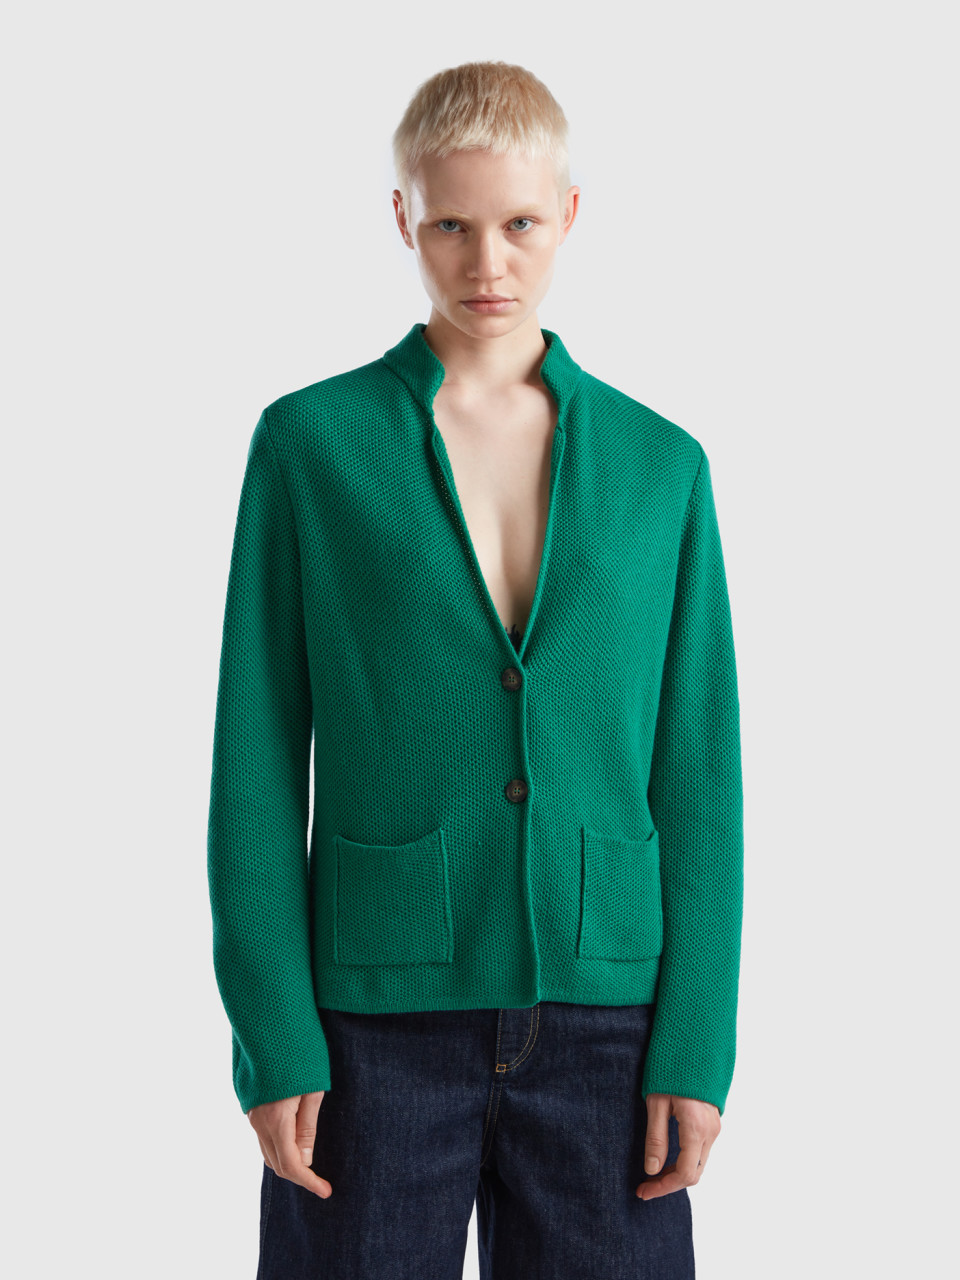 Benetton, Knit Jacket In Wool And Cashmere Blend, Green, Women